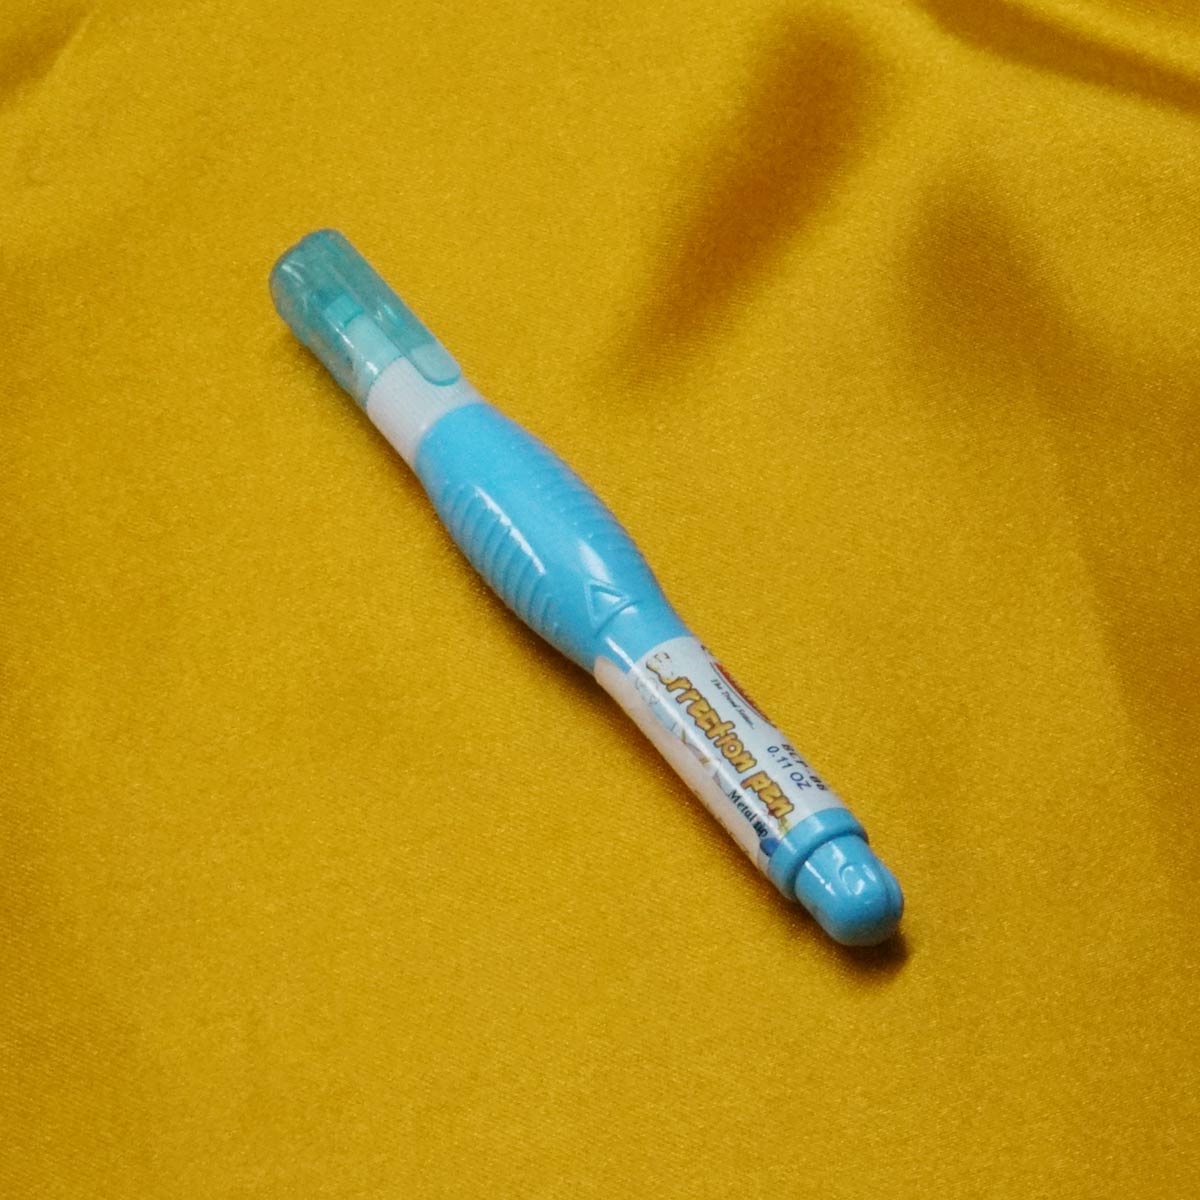 Bambalio Sky Blue Color Body Small Size Qiuick Dry Correction Pen SKU 20840